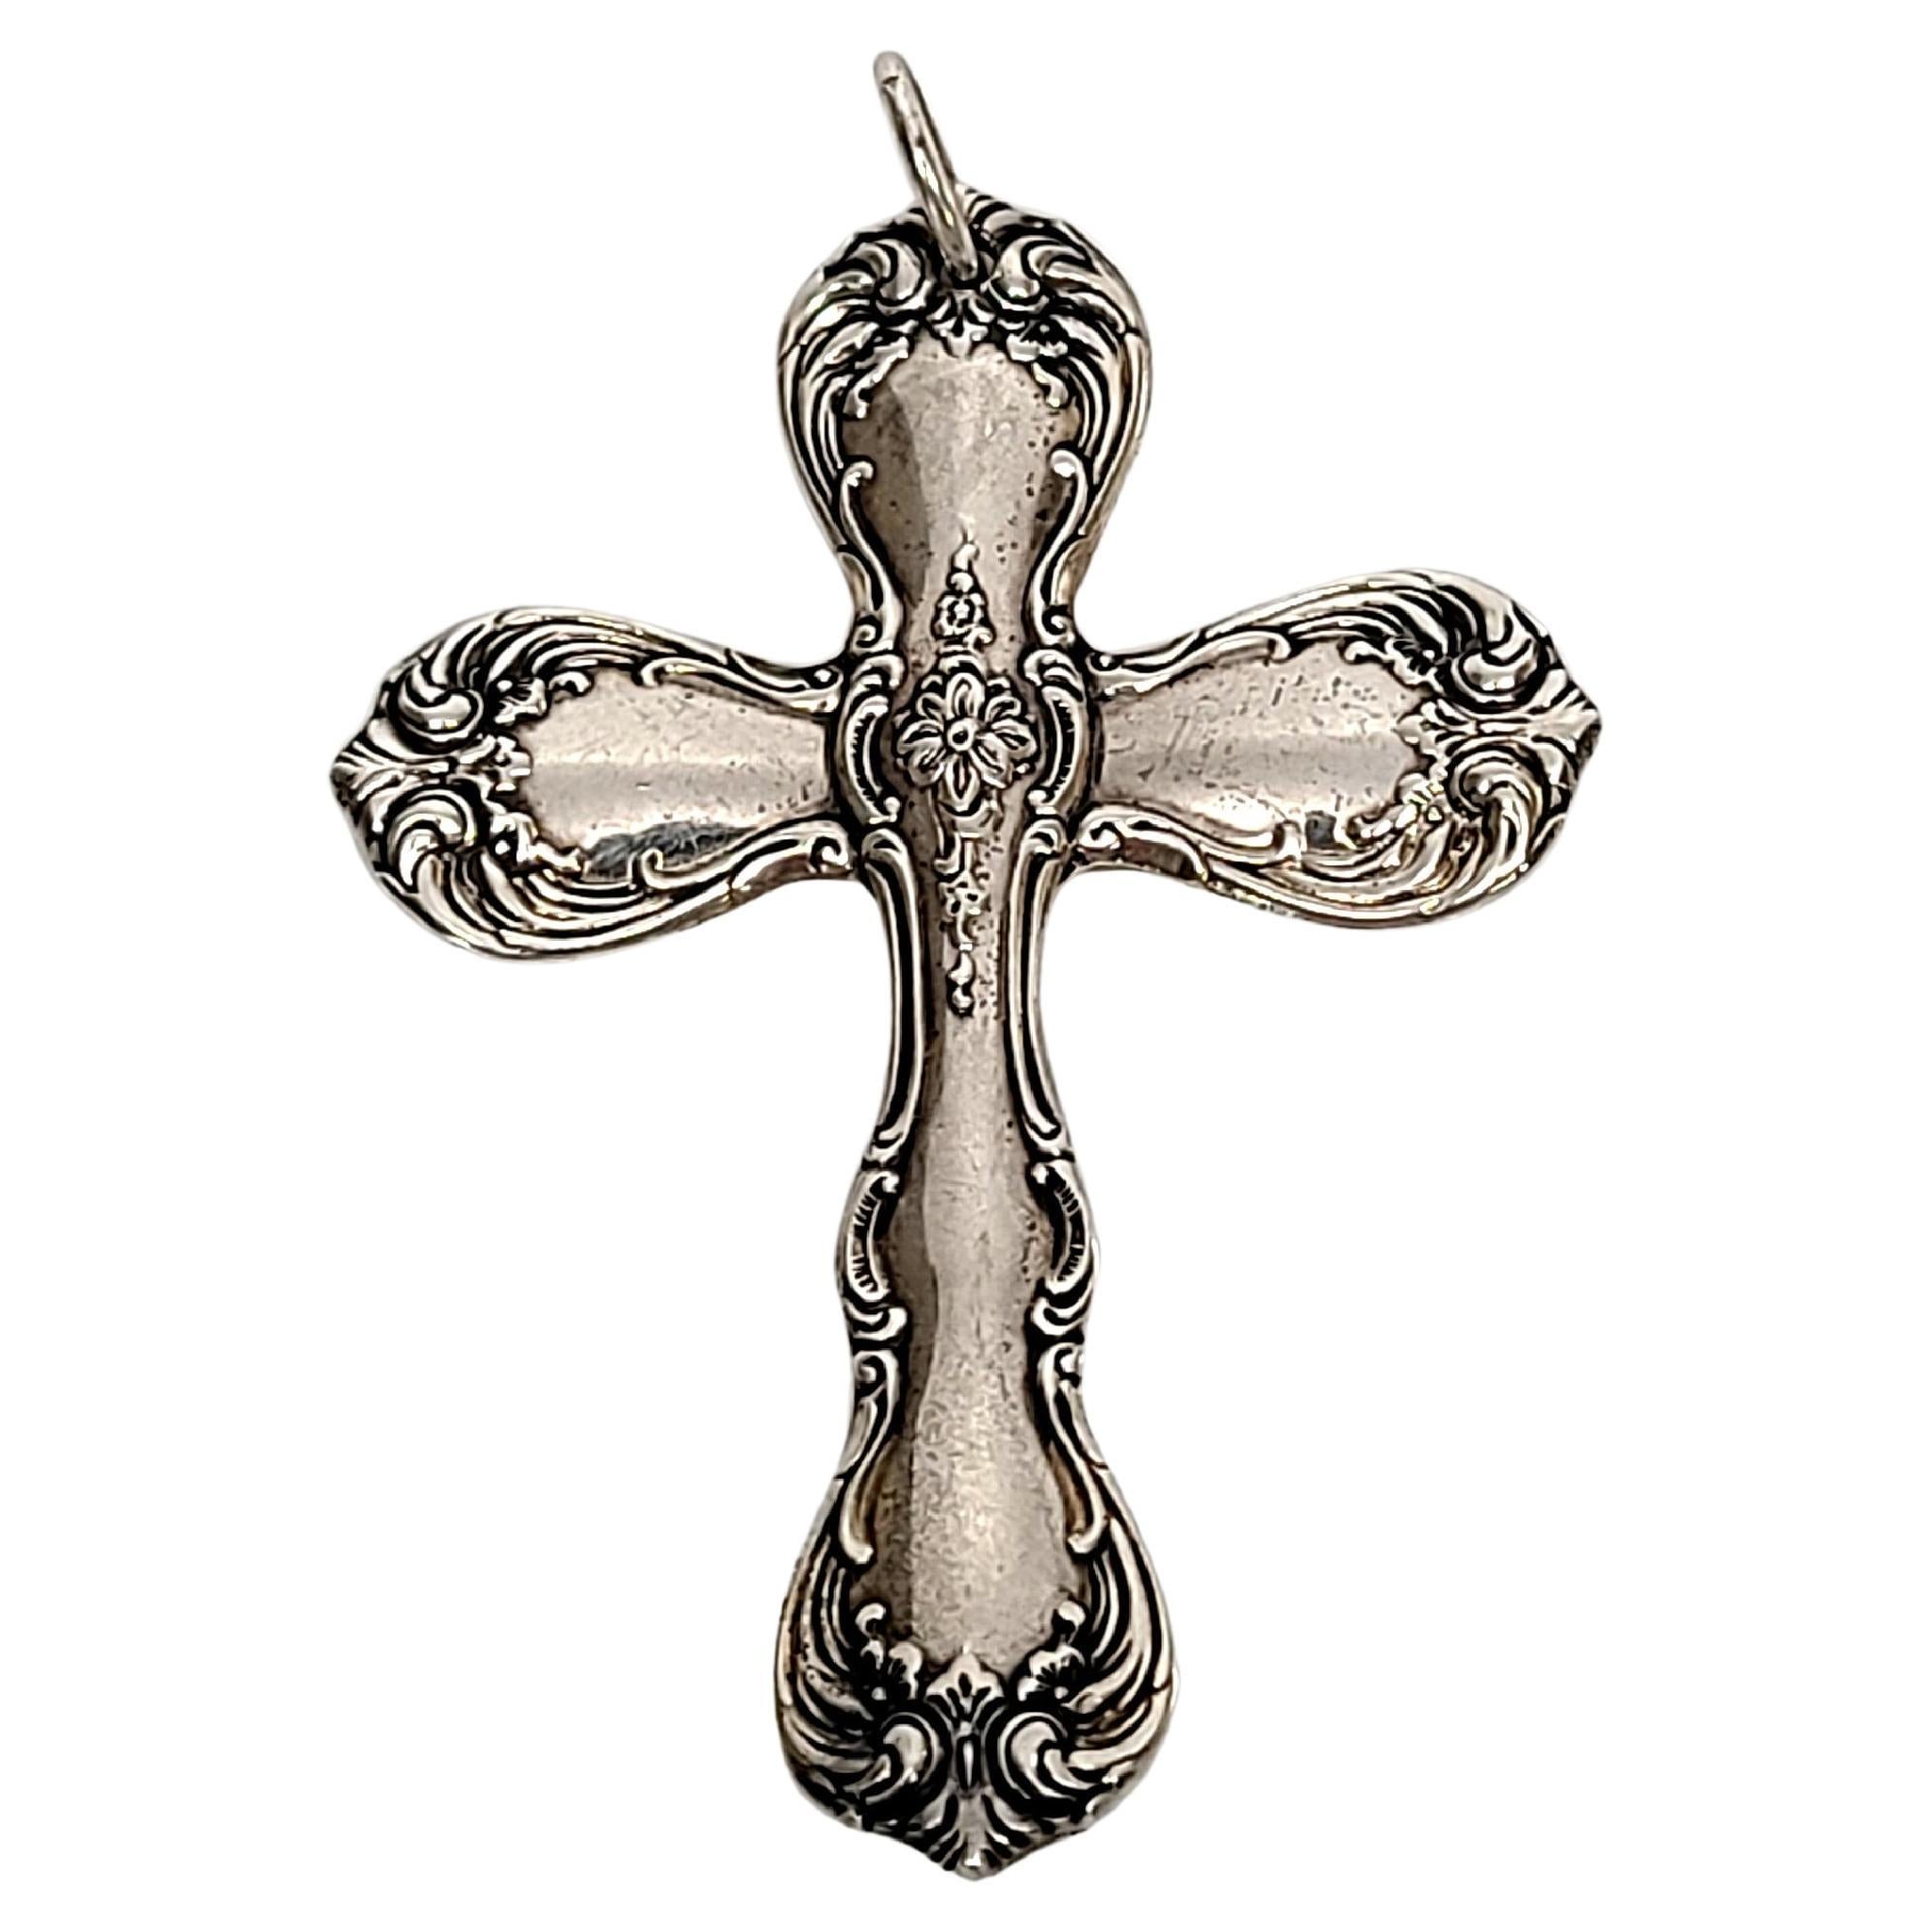 Towle Old Master Sterling Silver Cross Pendant/Ornament